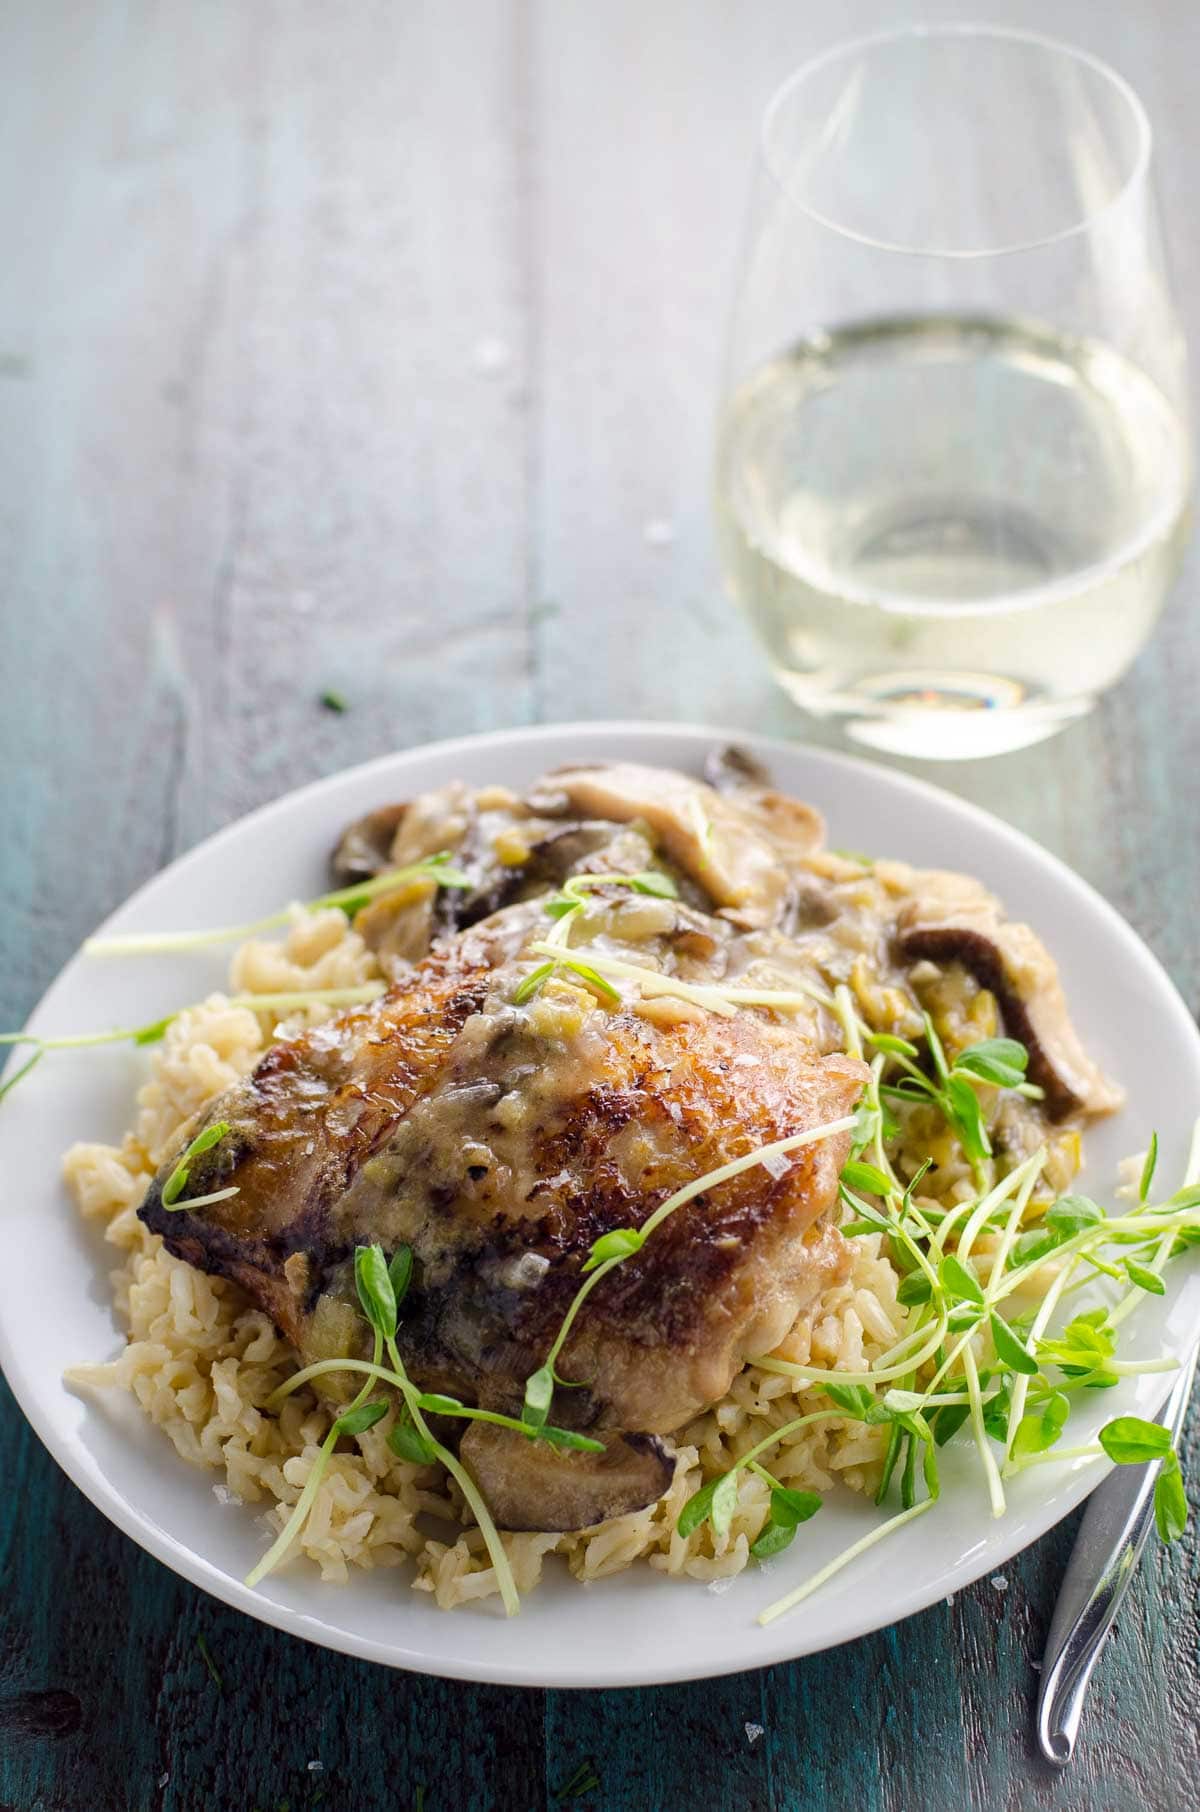 dutch oven chicken thighs with leeks, mushrooms and white wine on a plate with a glass of wine